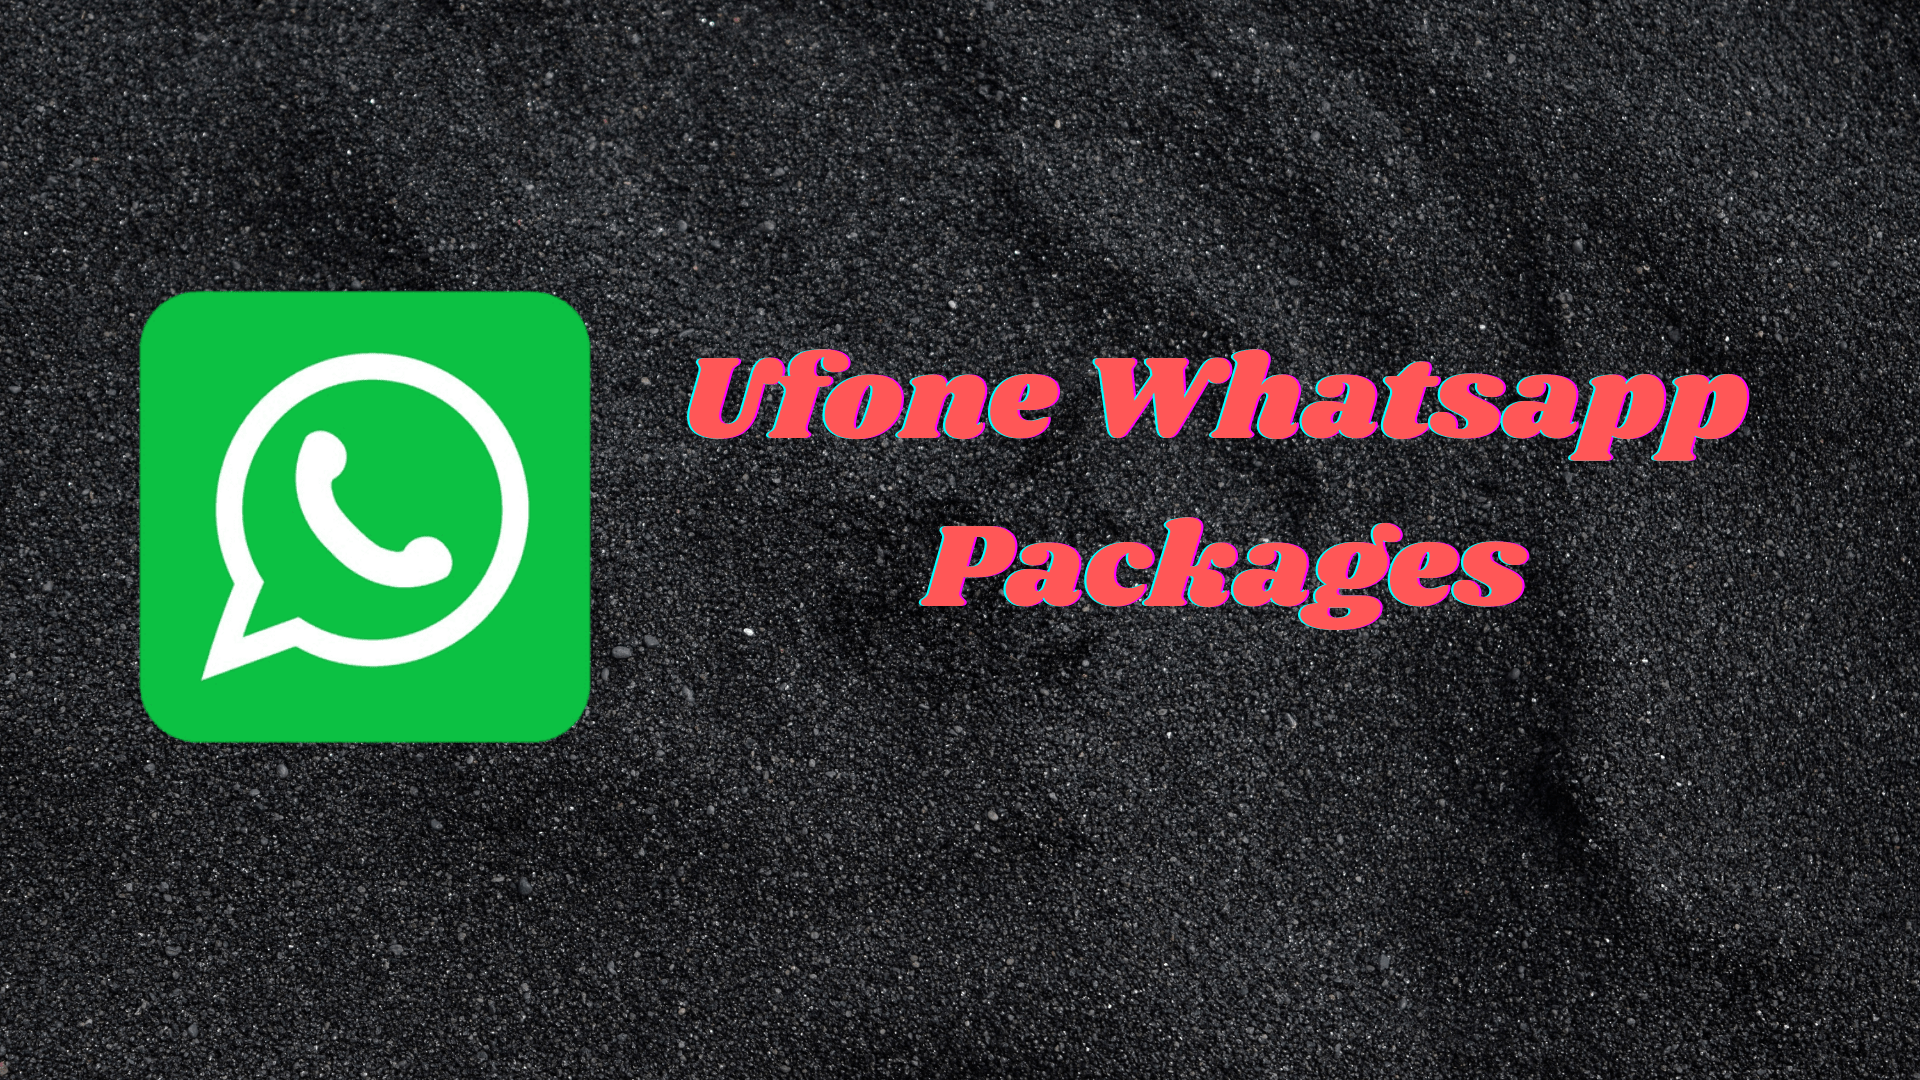 Best Ufone Whatsapp Packages